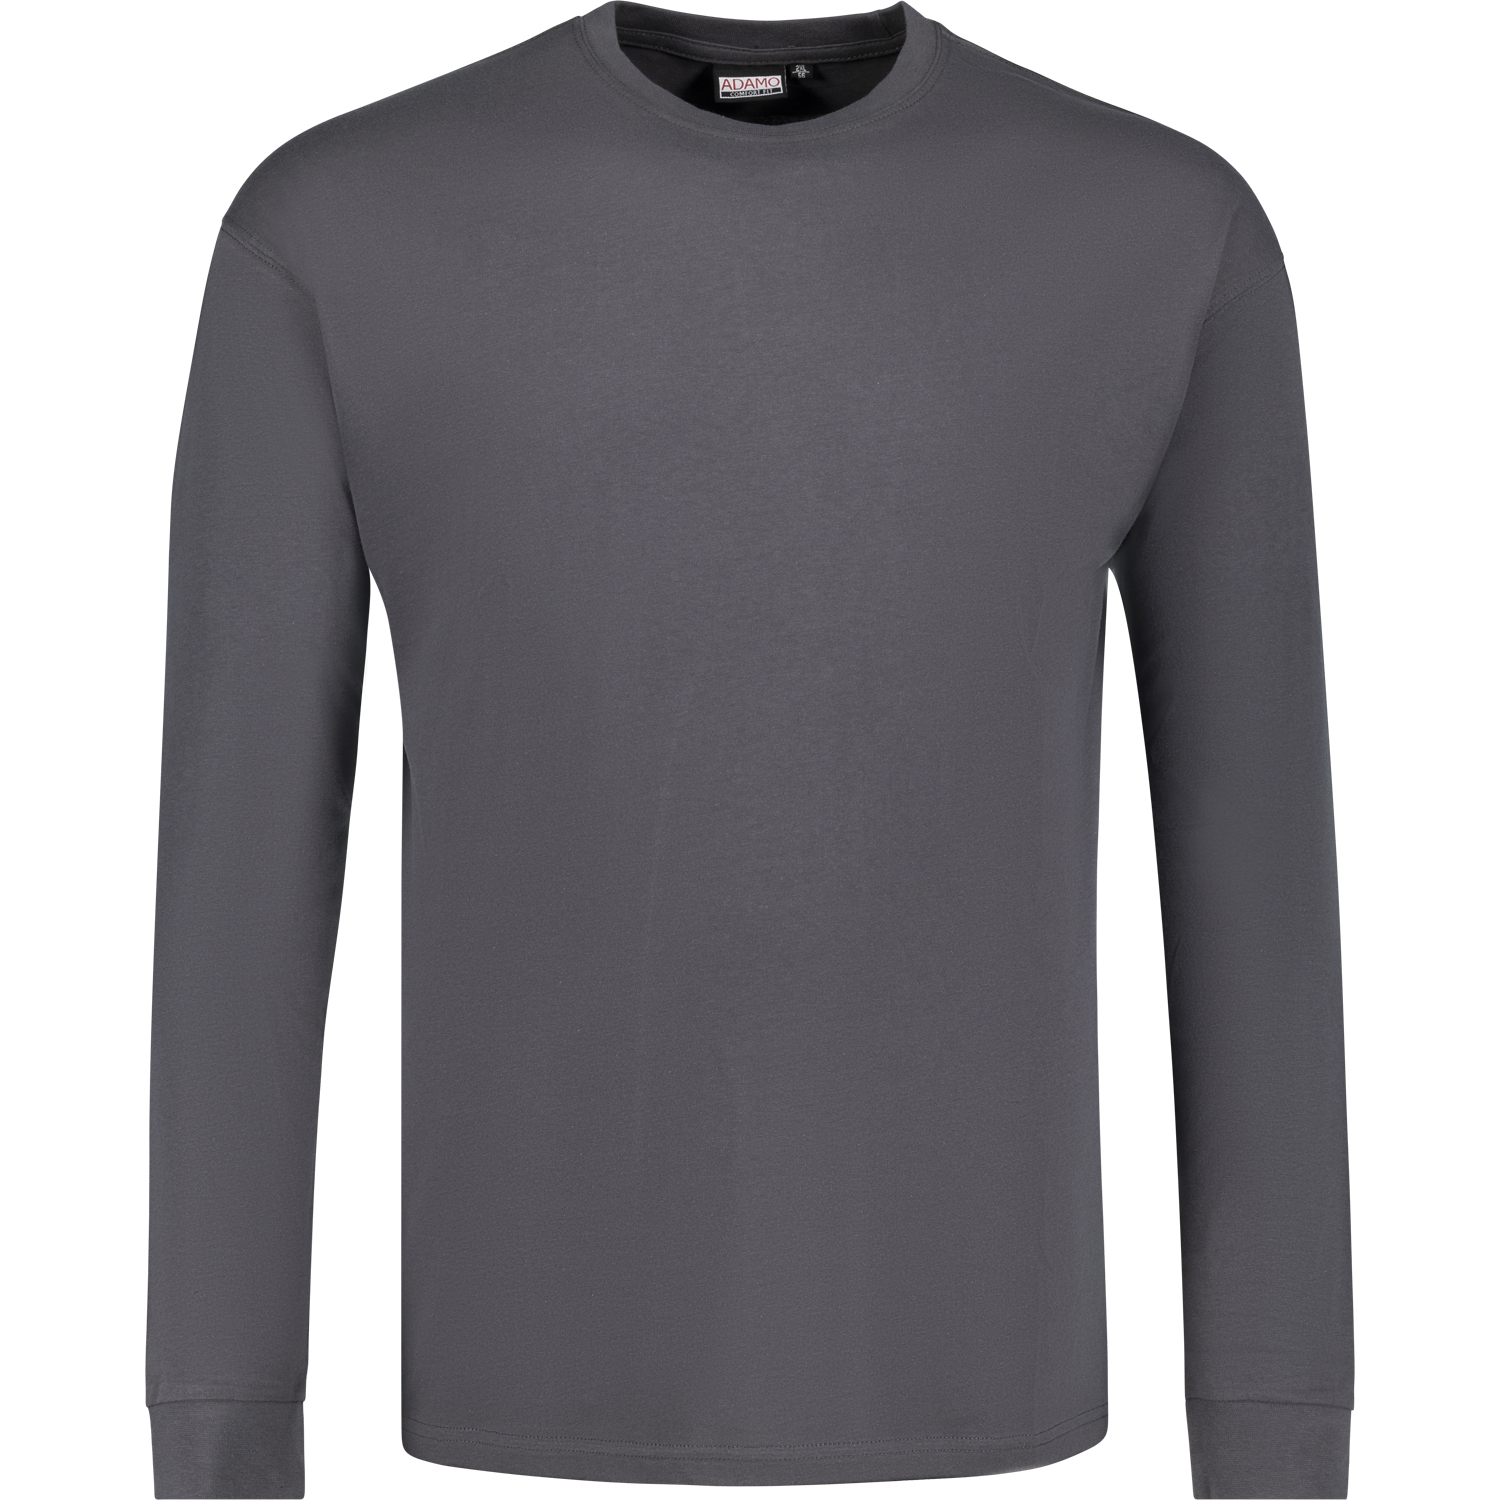 ADAMO longsleeve for men COMFORT FIT in dark grey with round neck up to size 12XL